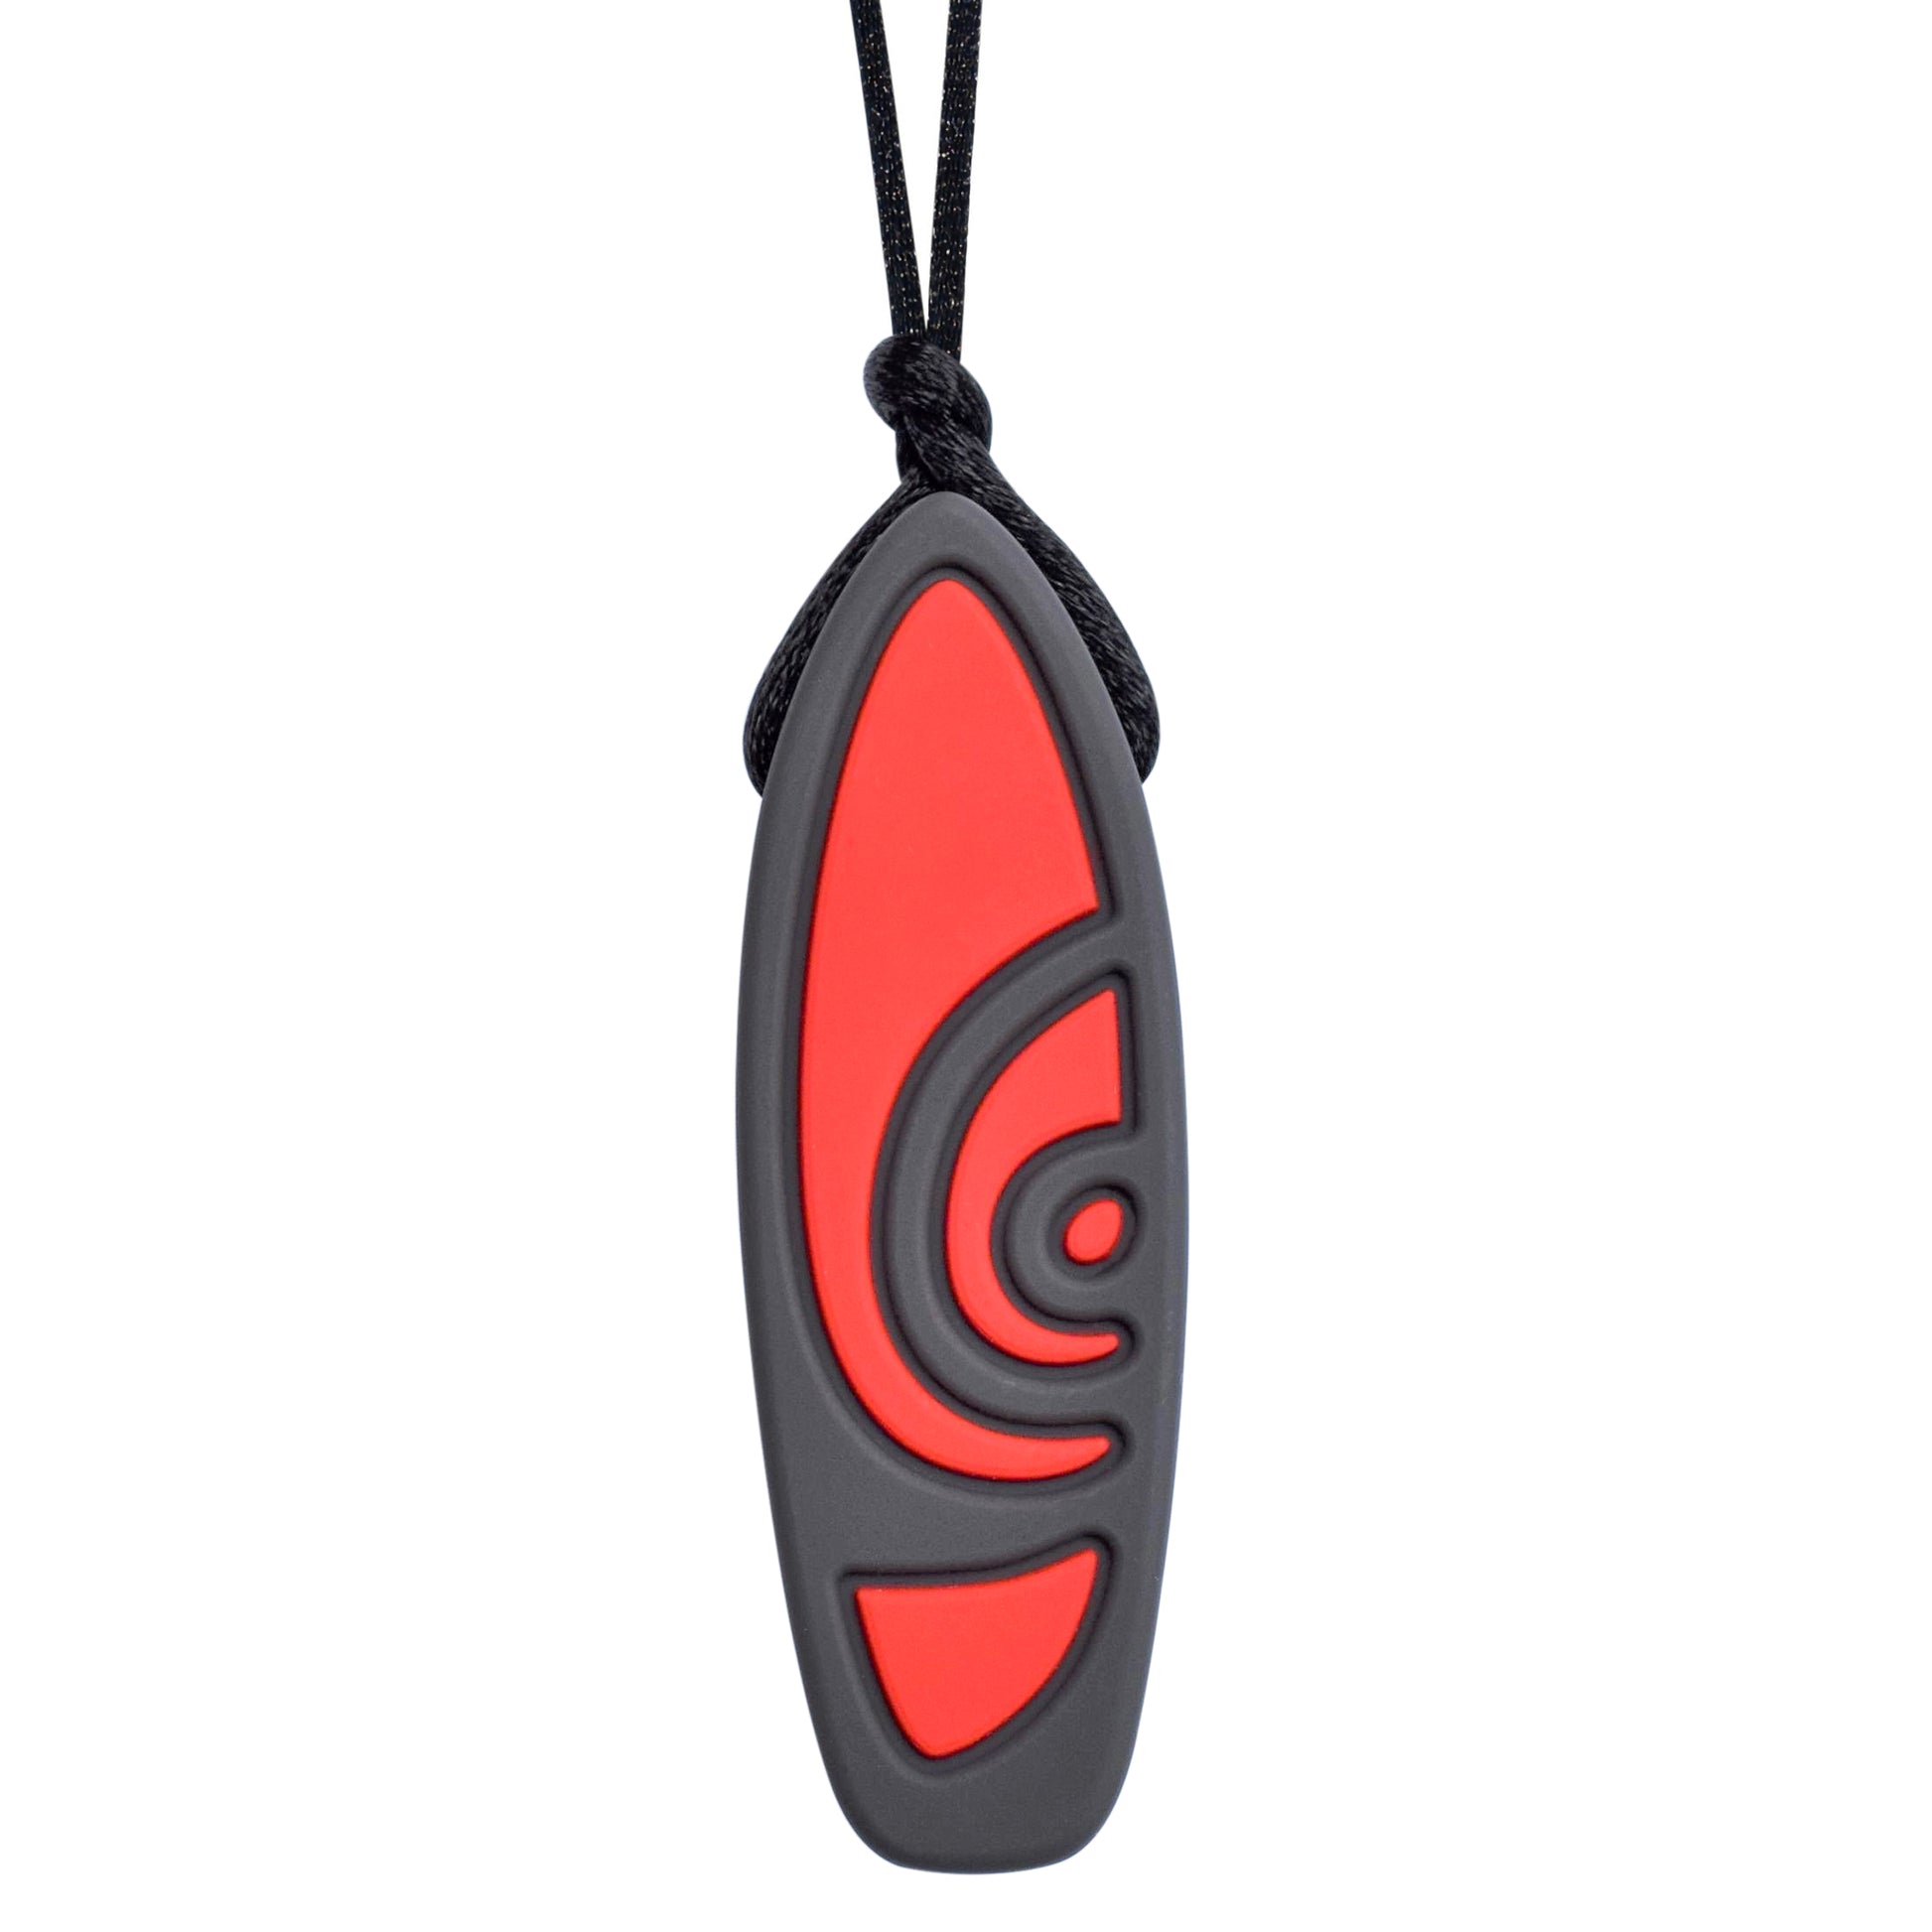 Munchables Surfboard Chew Necklace in black and red strung on a black cord.